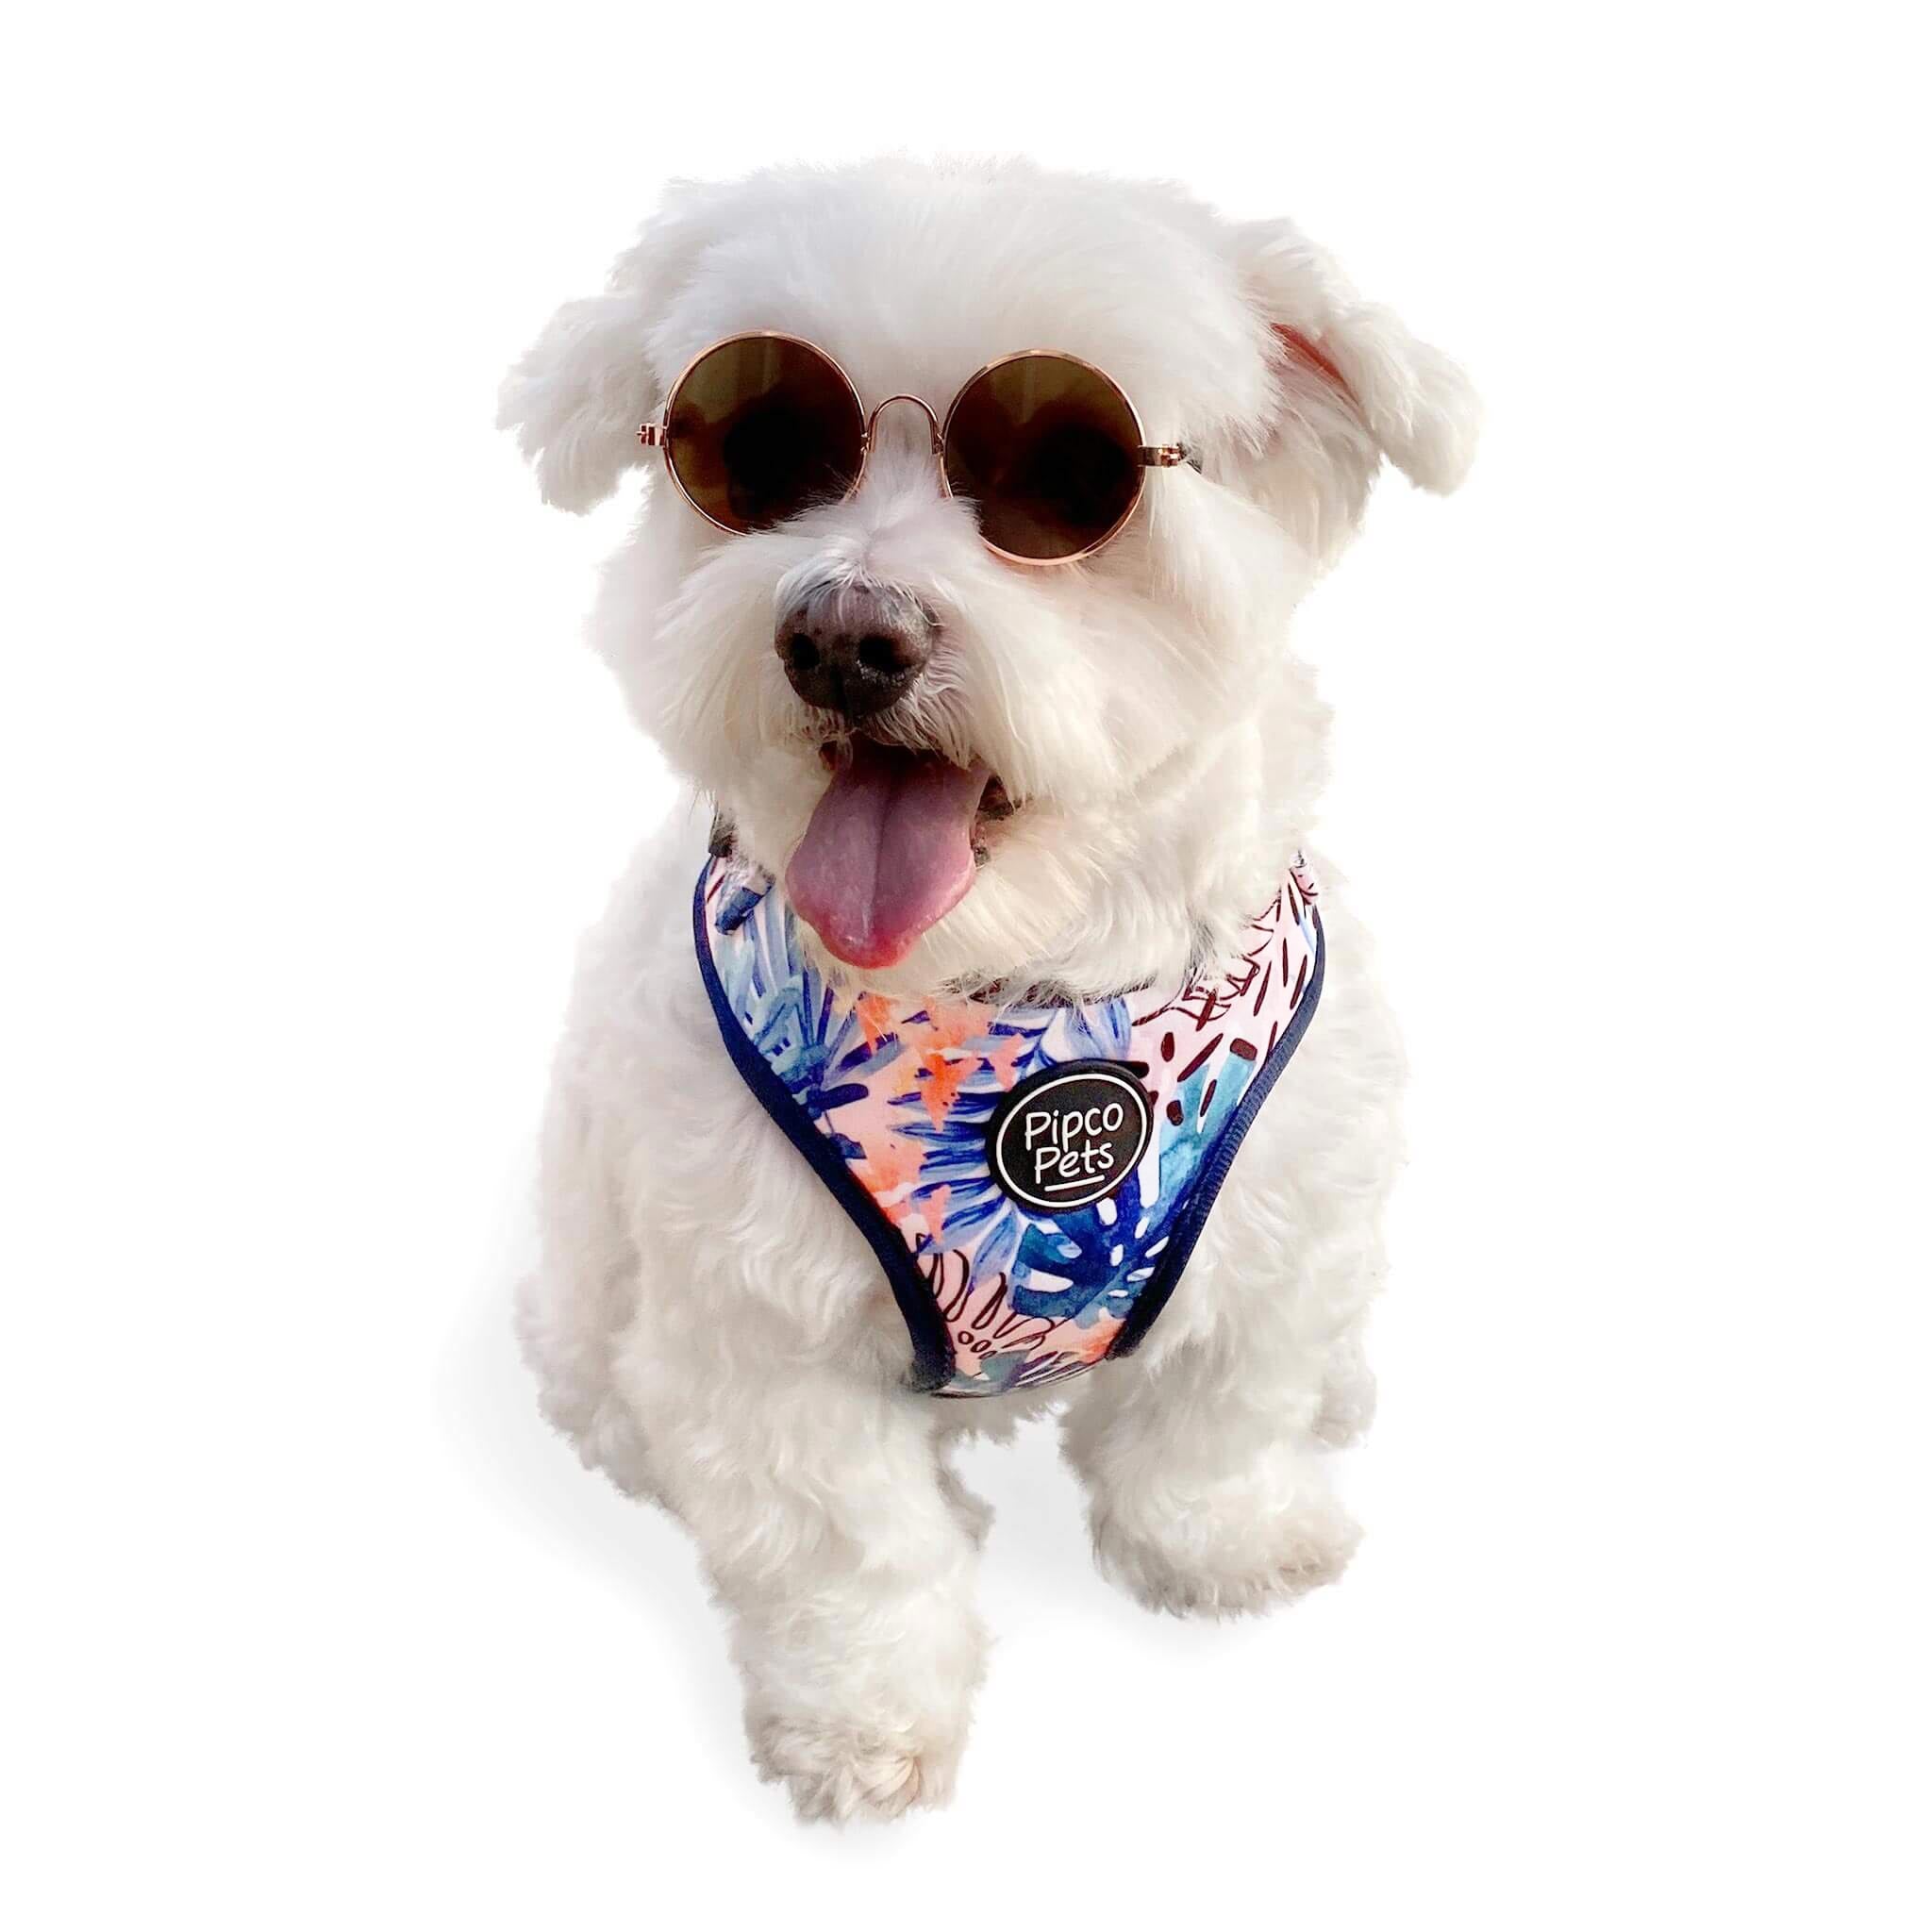 Cute dog wearing sunglasses and Pipco Pets adjustable harness with Tropic Fronds tropical leaves print pattern in blue